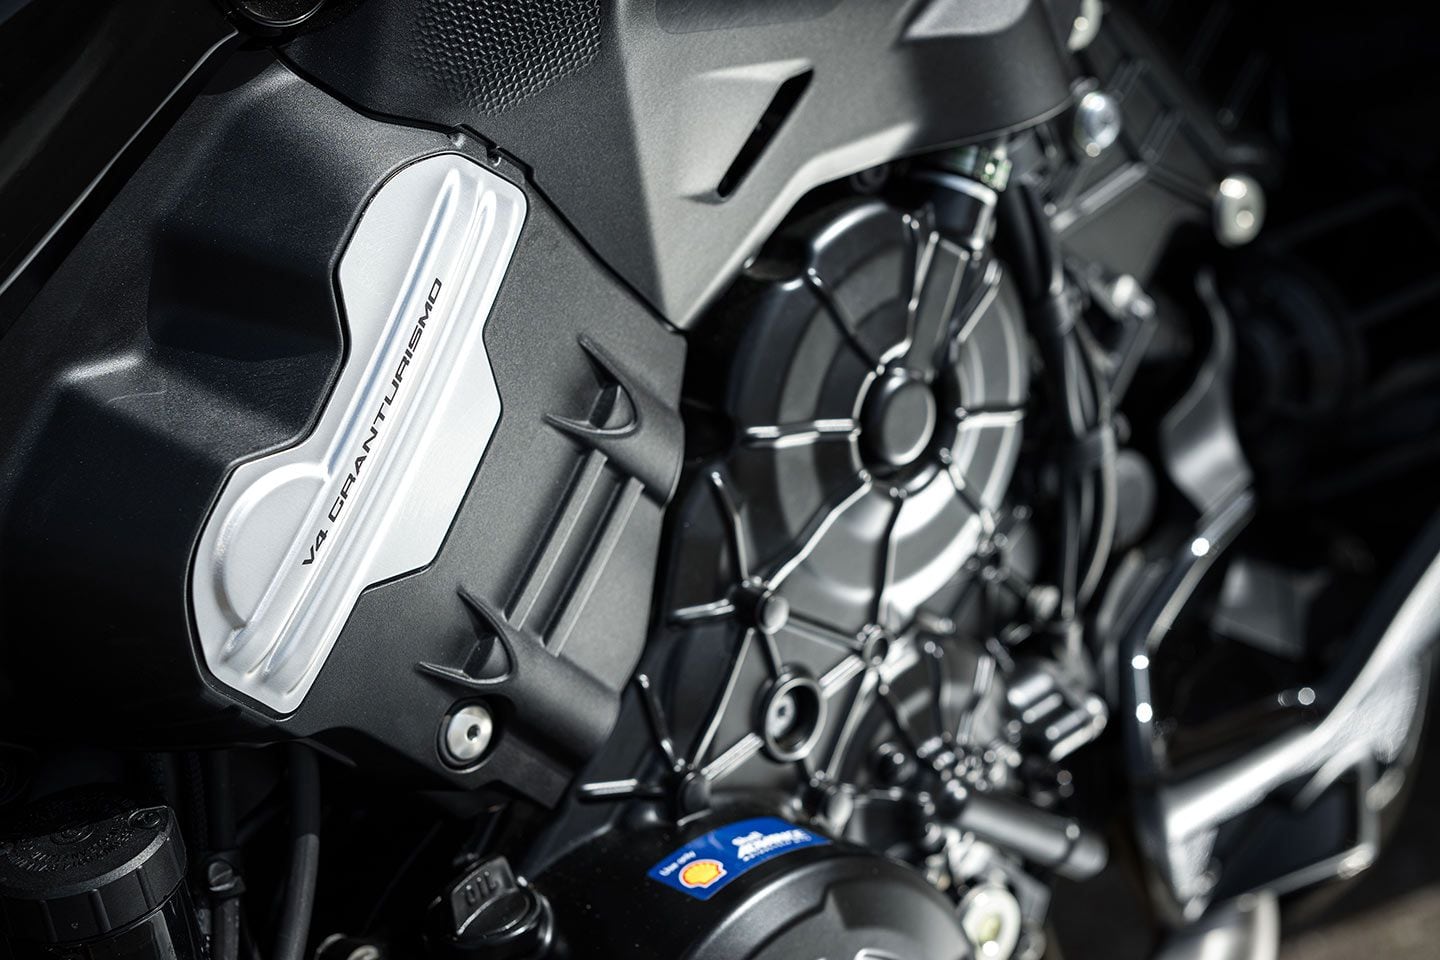 The 2023 Diavel borrows the 1,158cc V-4 Granturismo engine from the Multistrada and gets a fraction more torque.